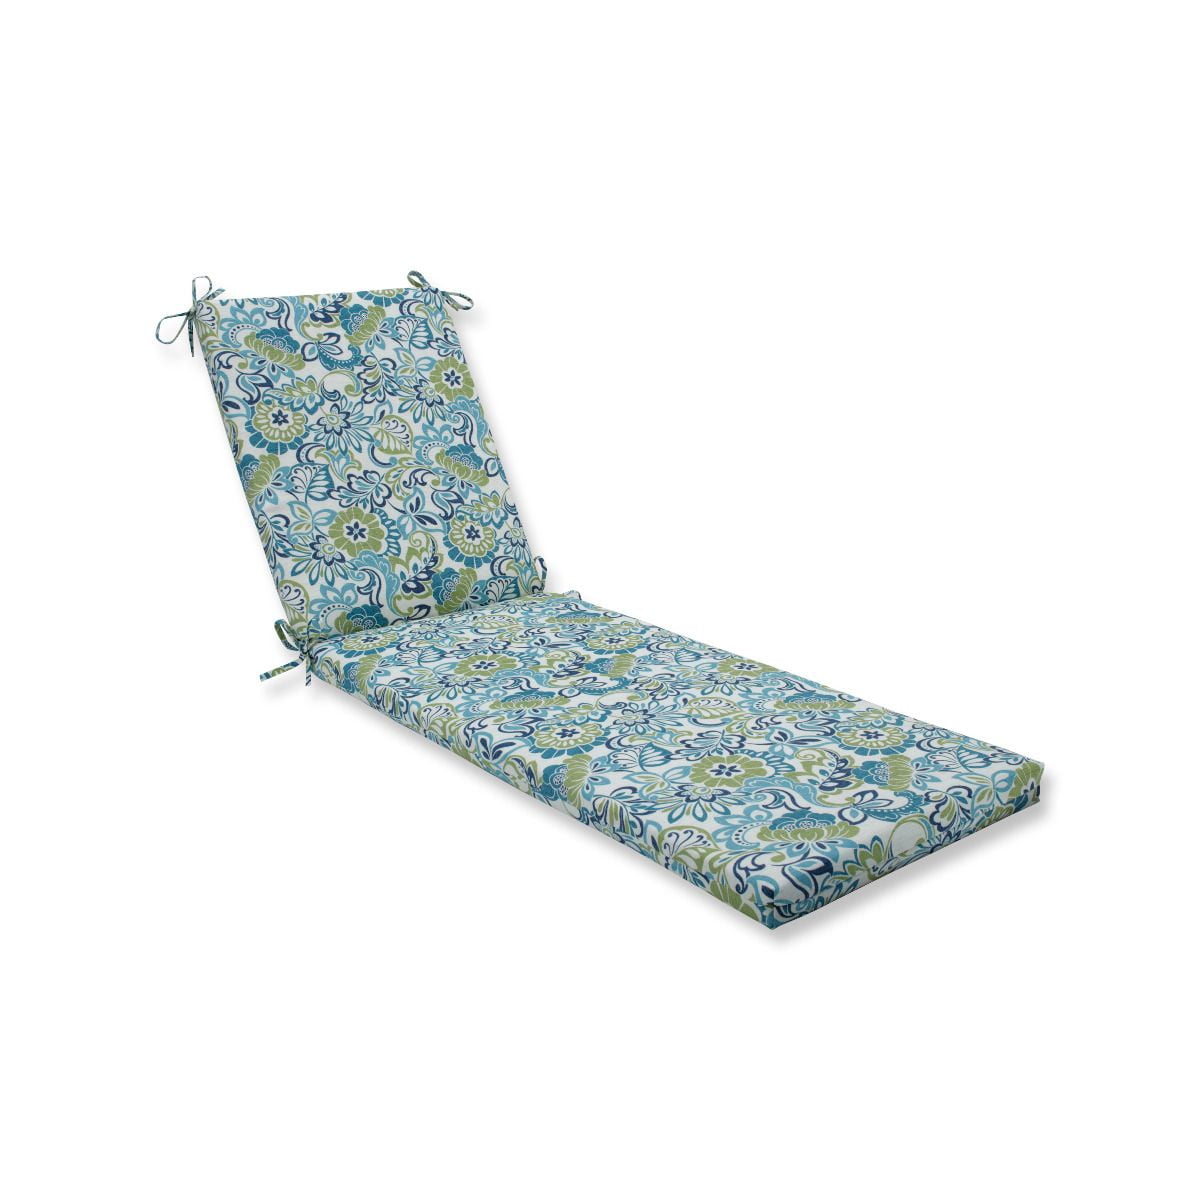 Green Vintage Floral Outdoor Chaise Cushion Pad Pool Lounger Lounge Chair 